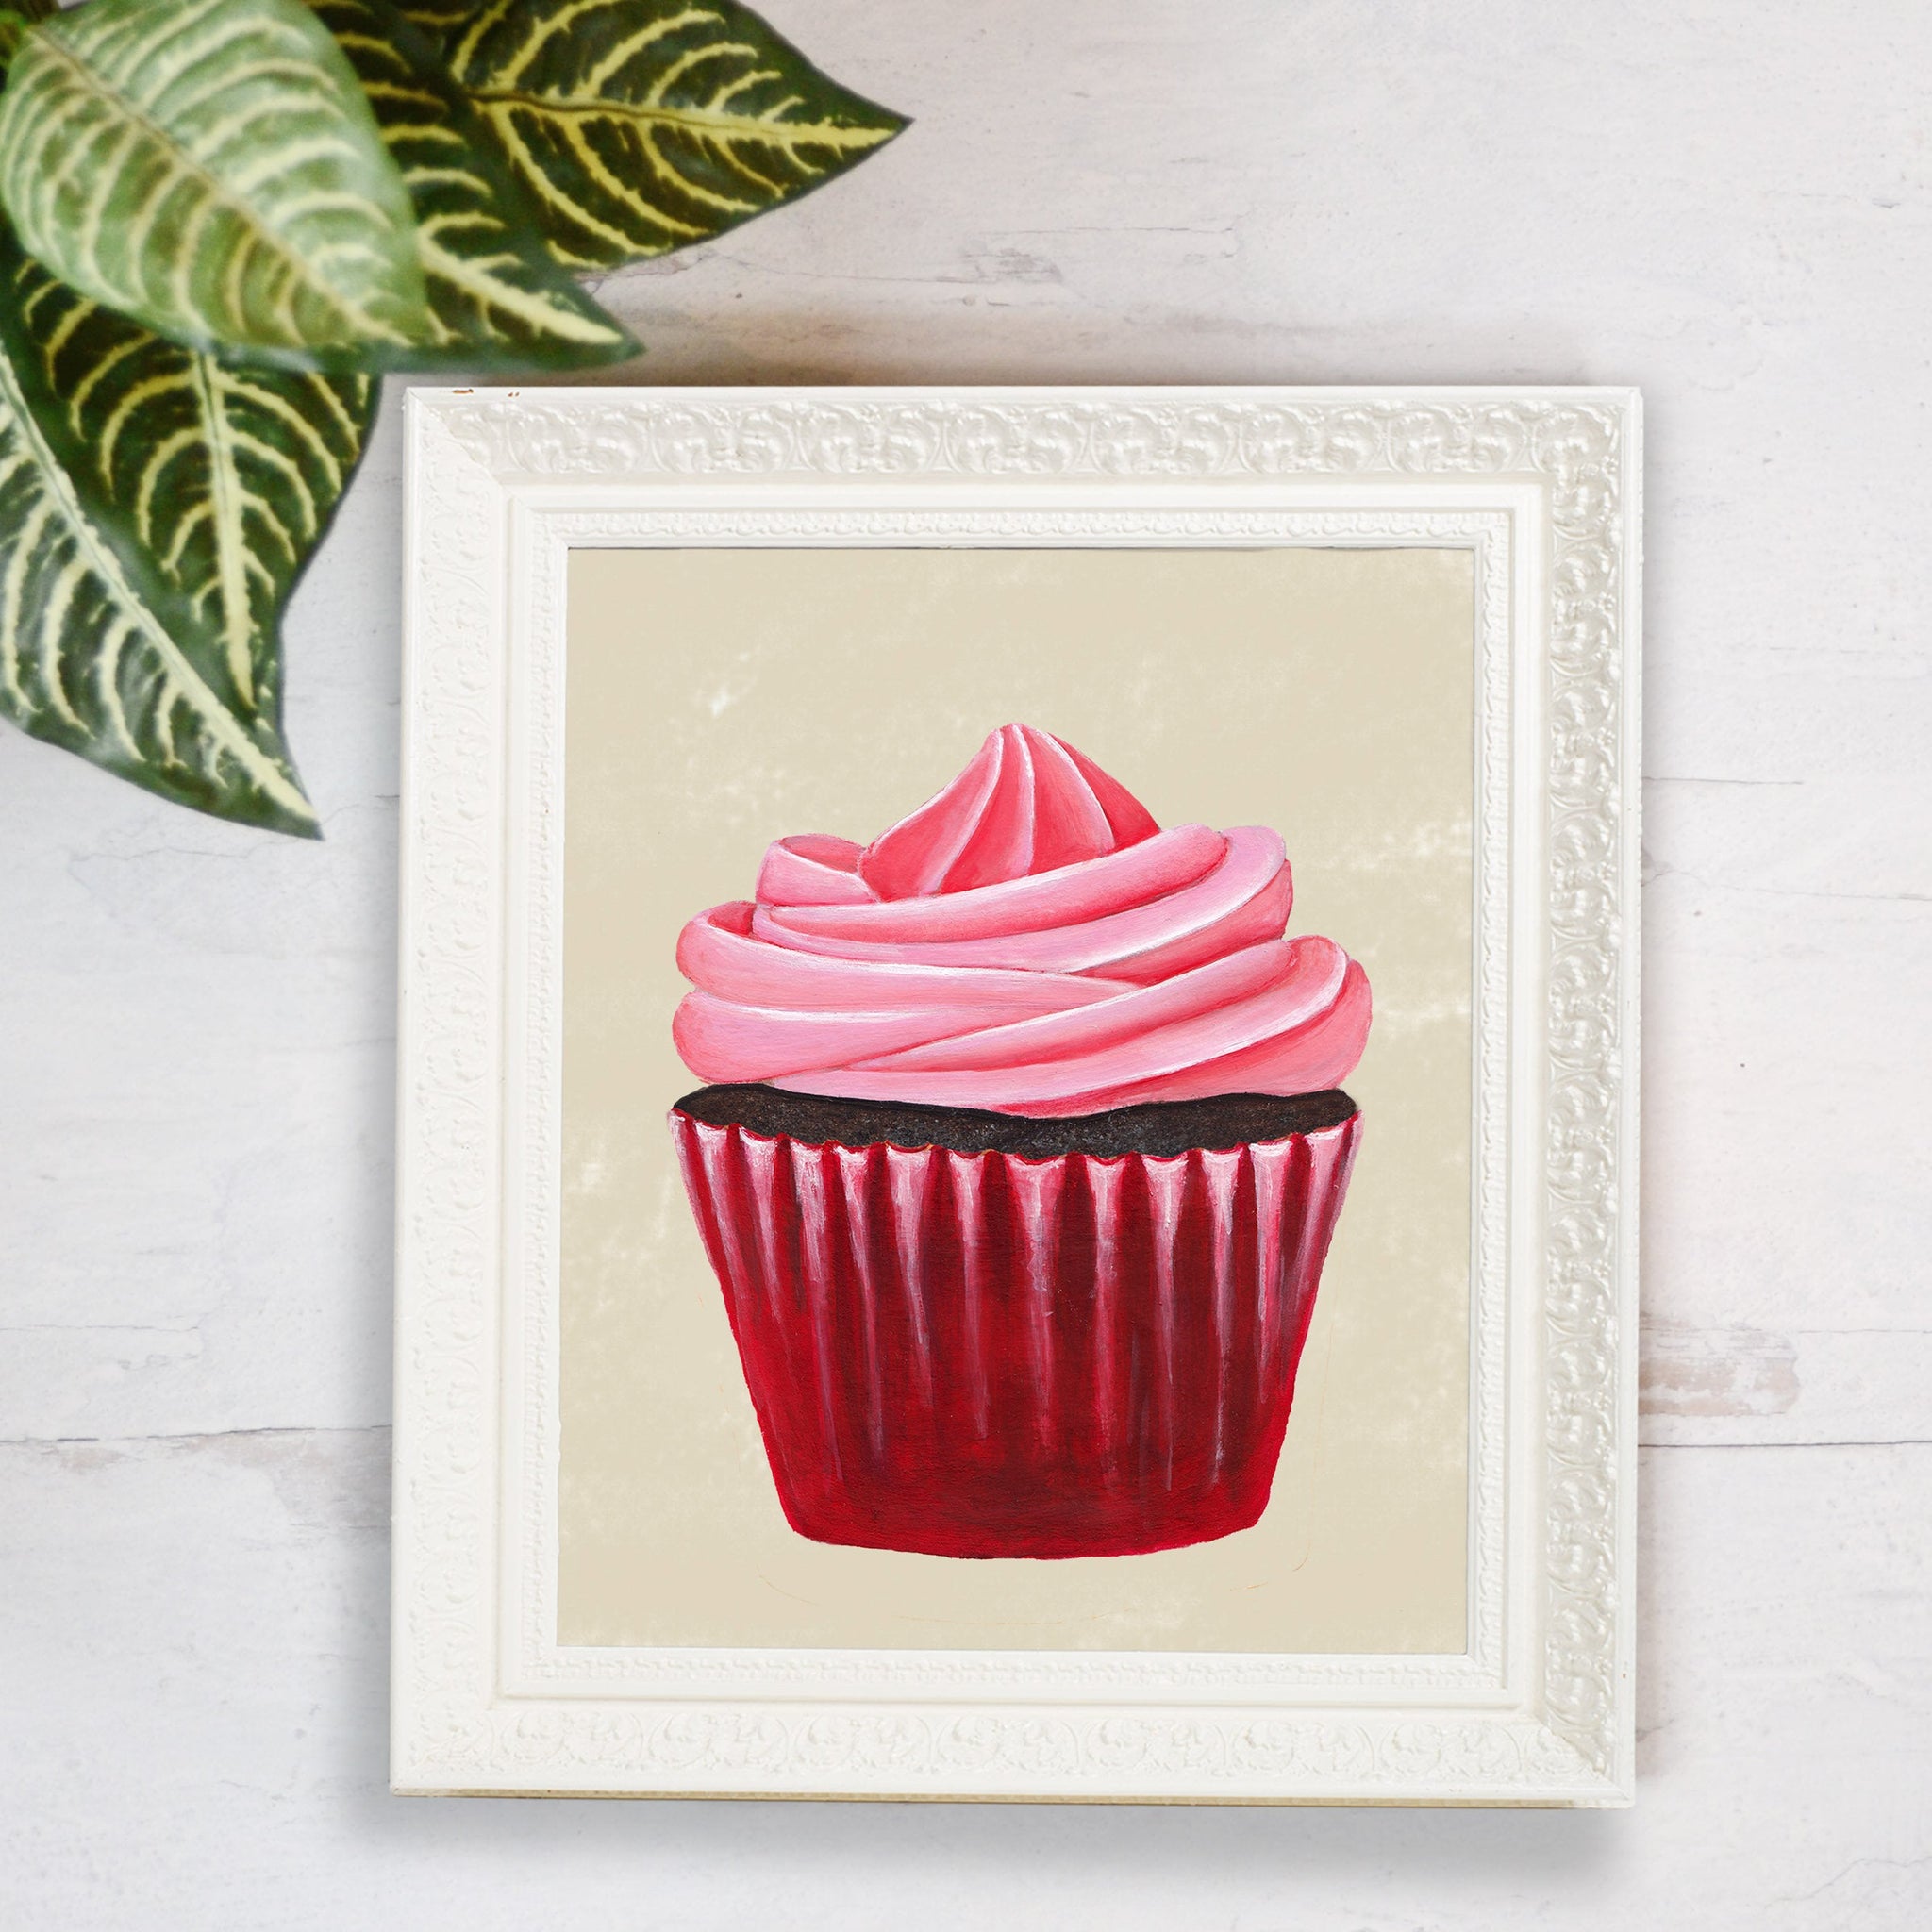 print reproduction of hand painted pink swirl frosted cupcake in red wrapper illustration